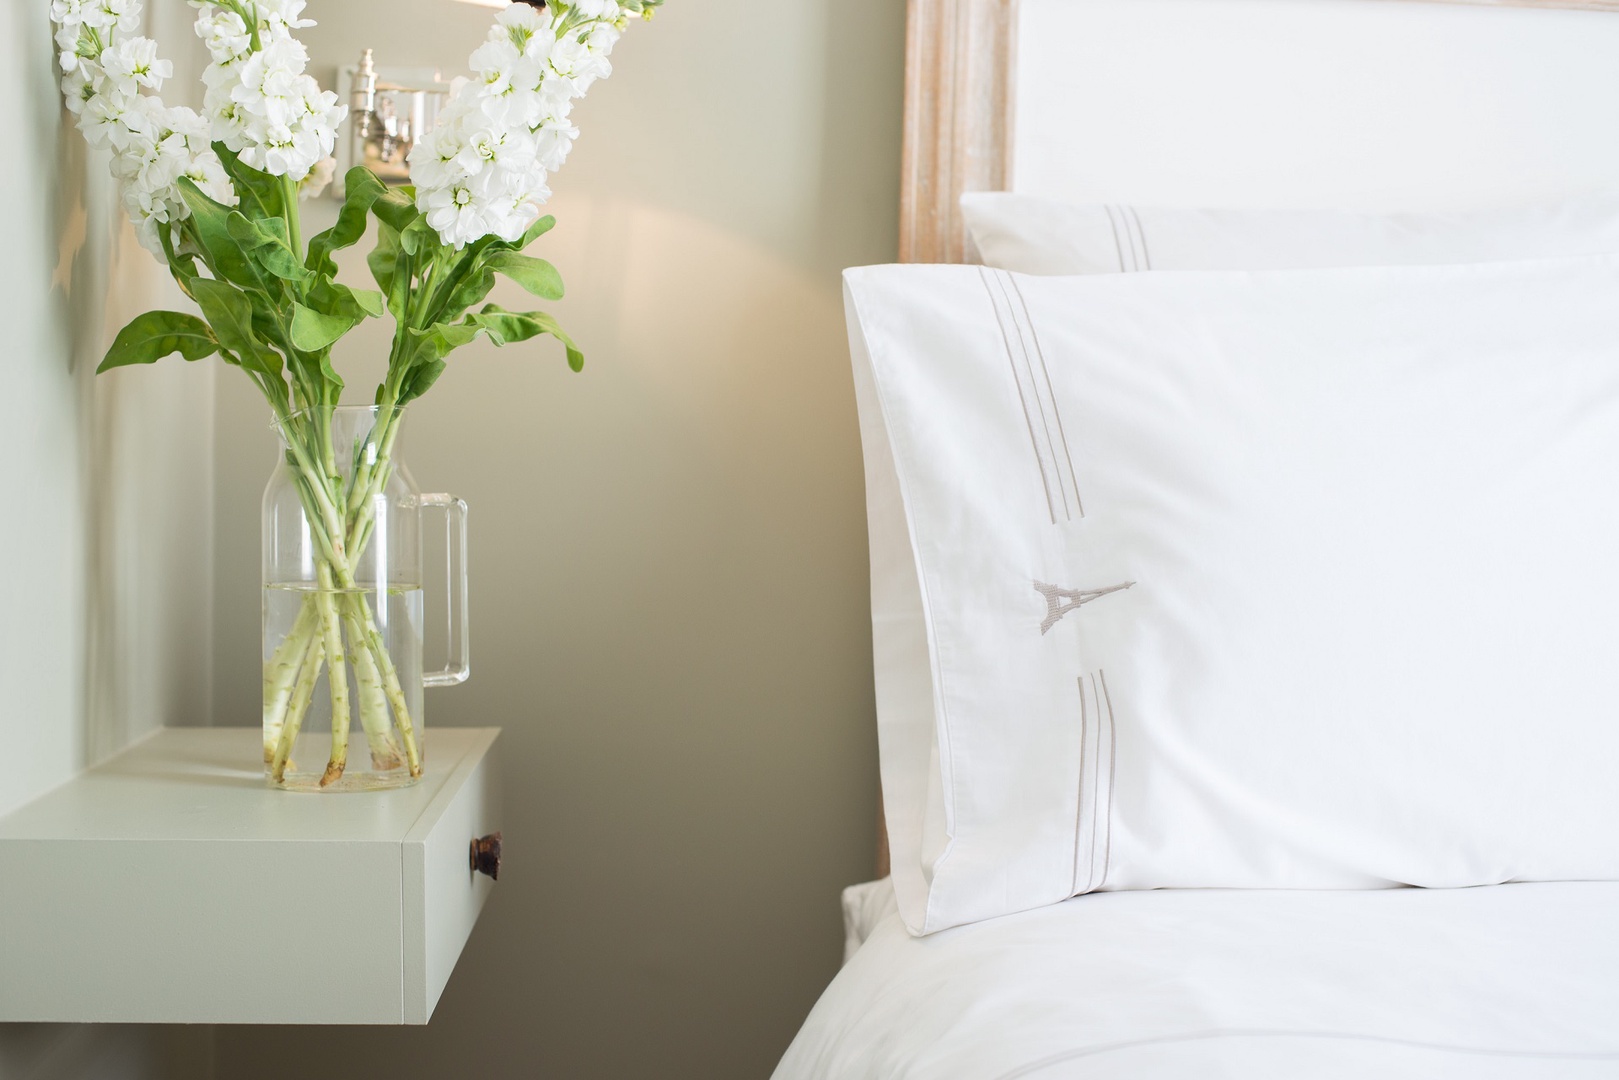 Soft lighting and luxury linens give the bedroom a romantic feel.